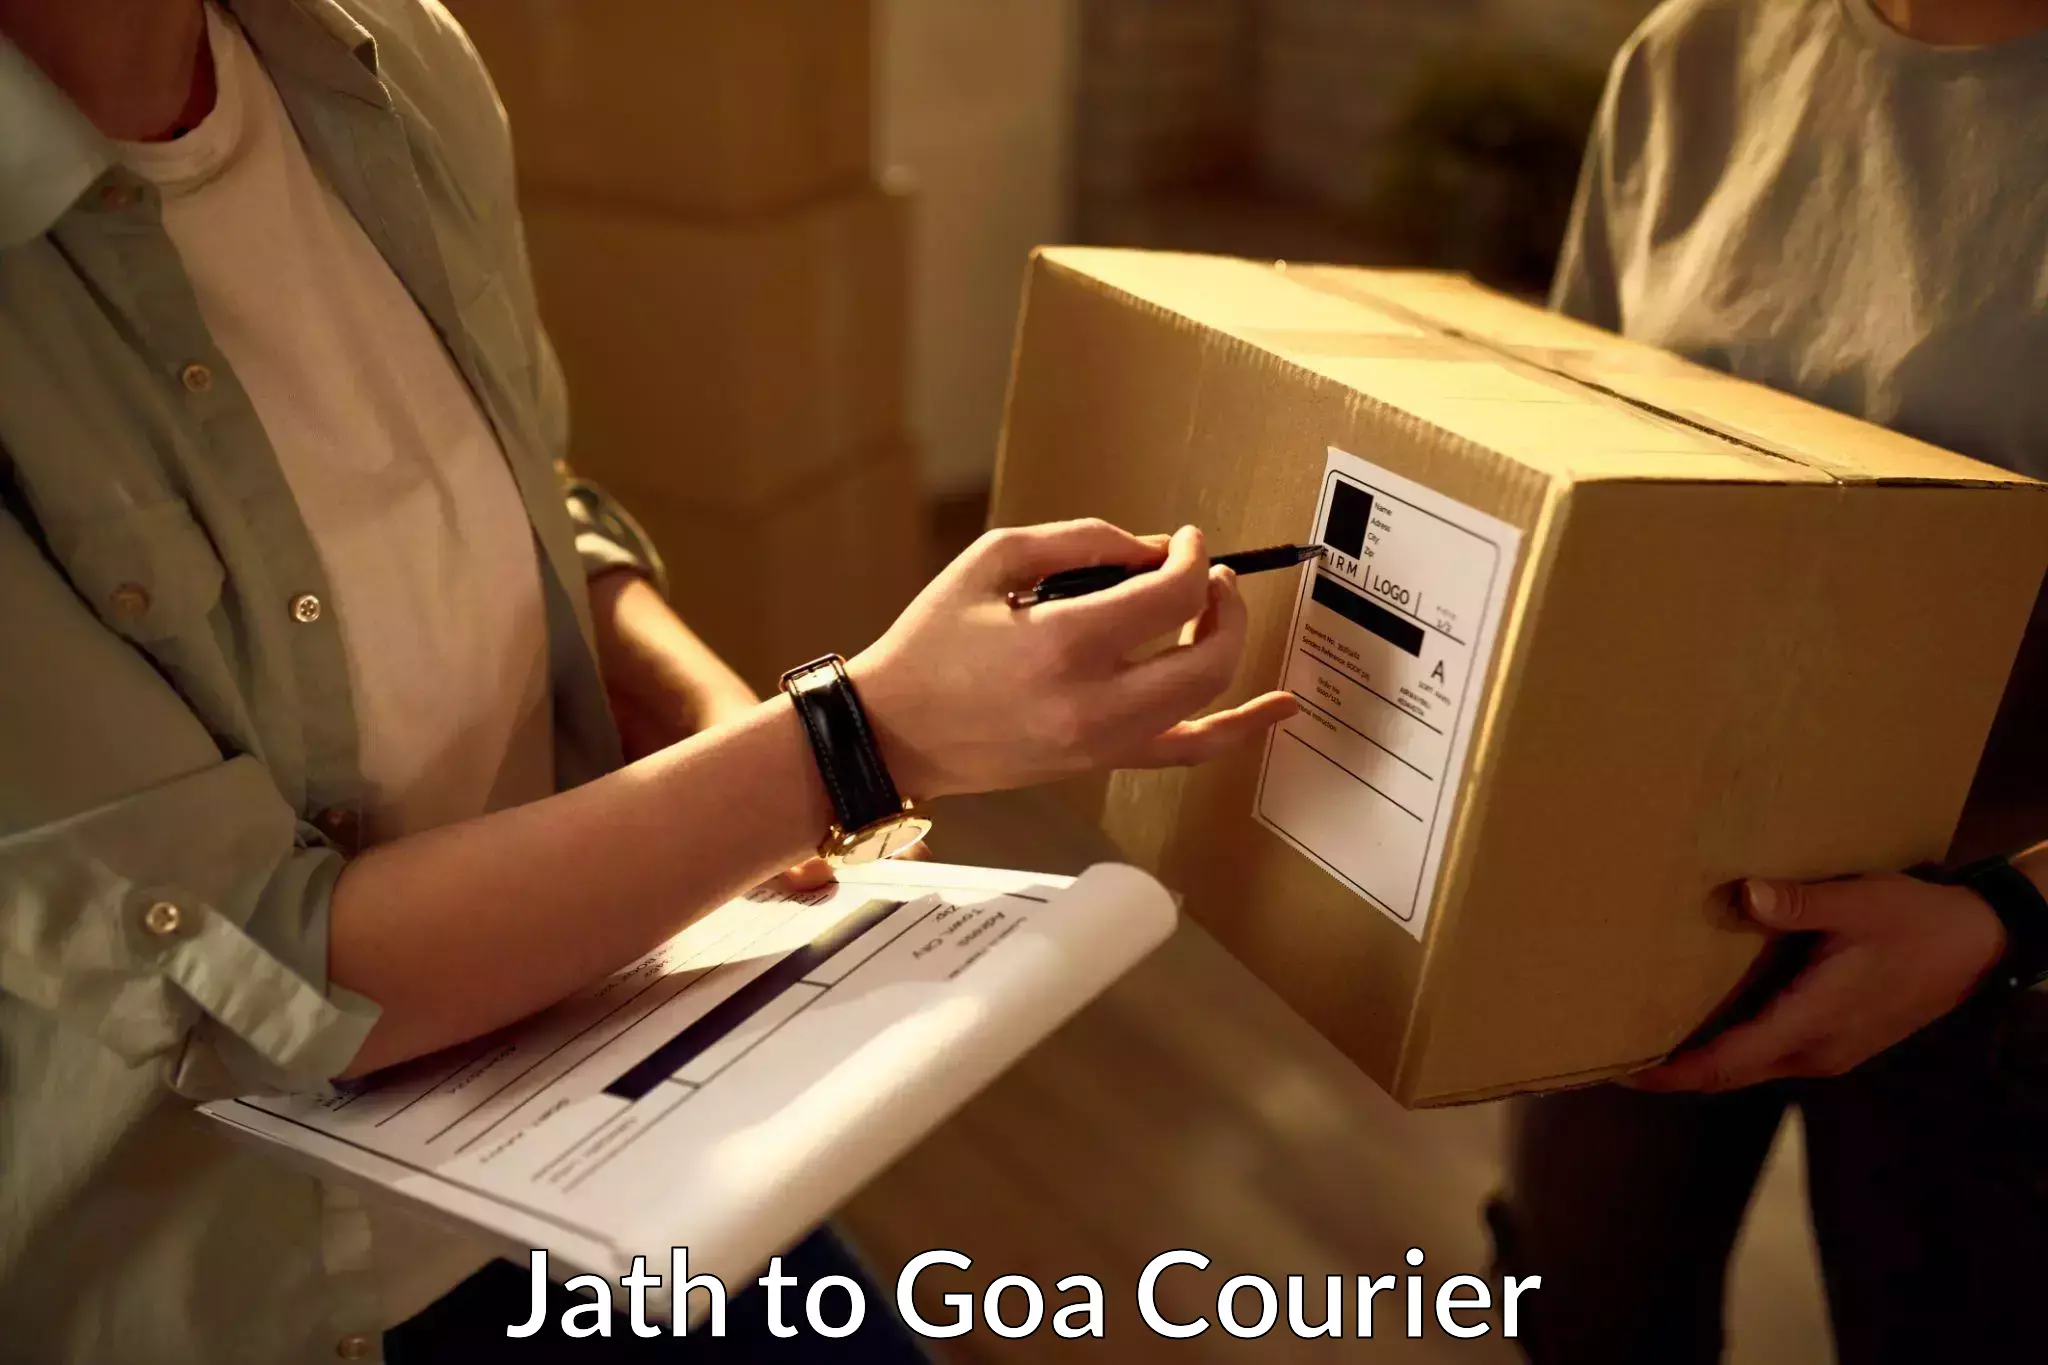 Global courier networks Jath to Goa